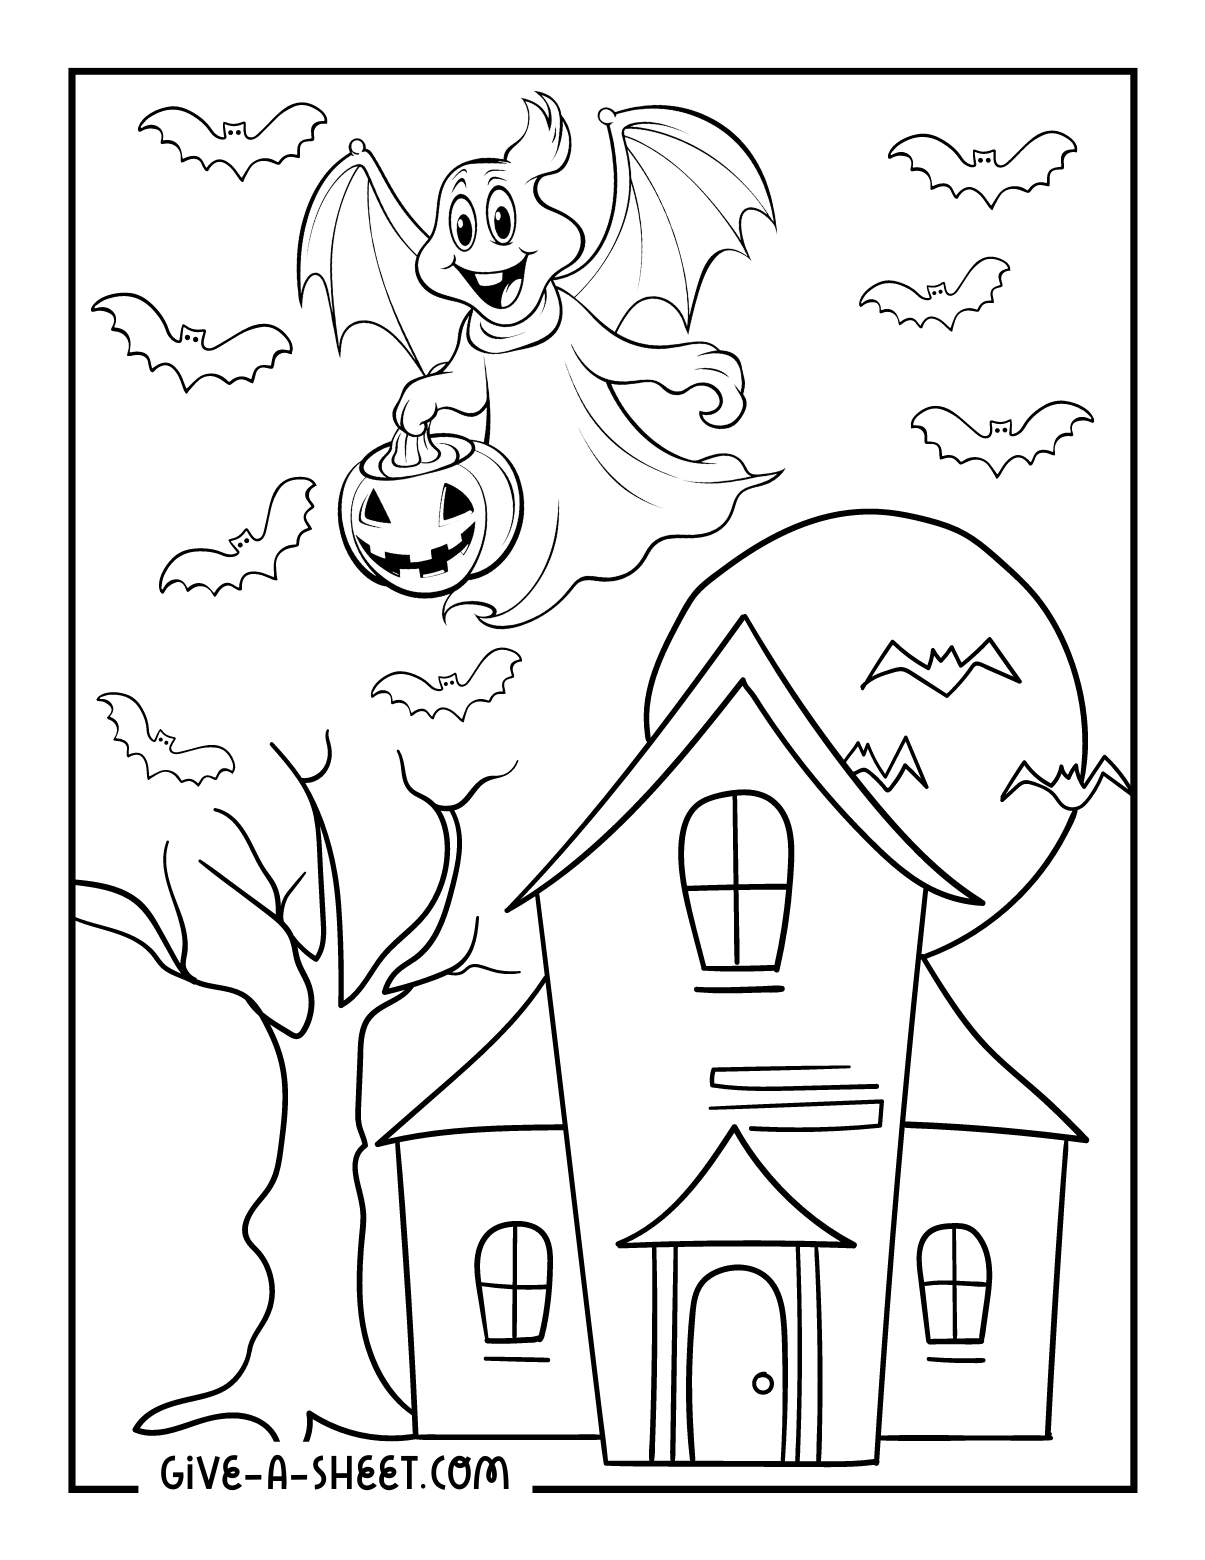 Halloween ghost pumpkin coloring pages for kids.